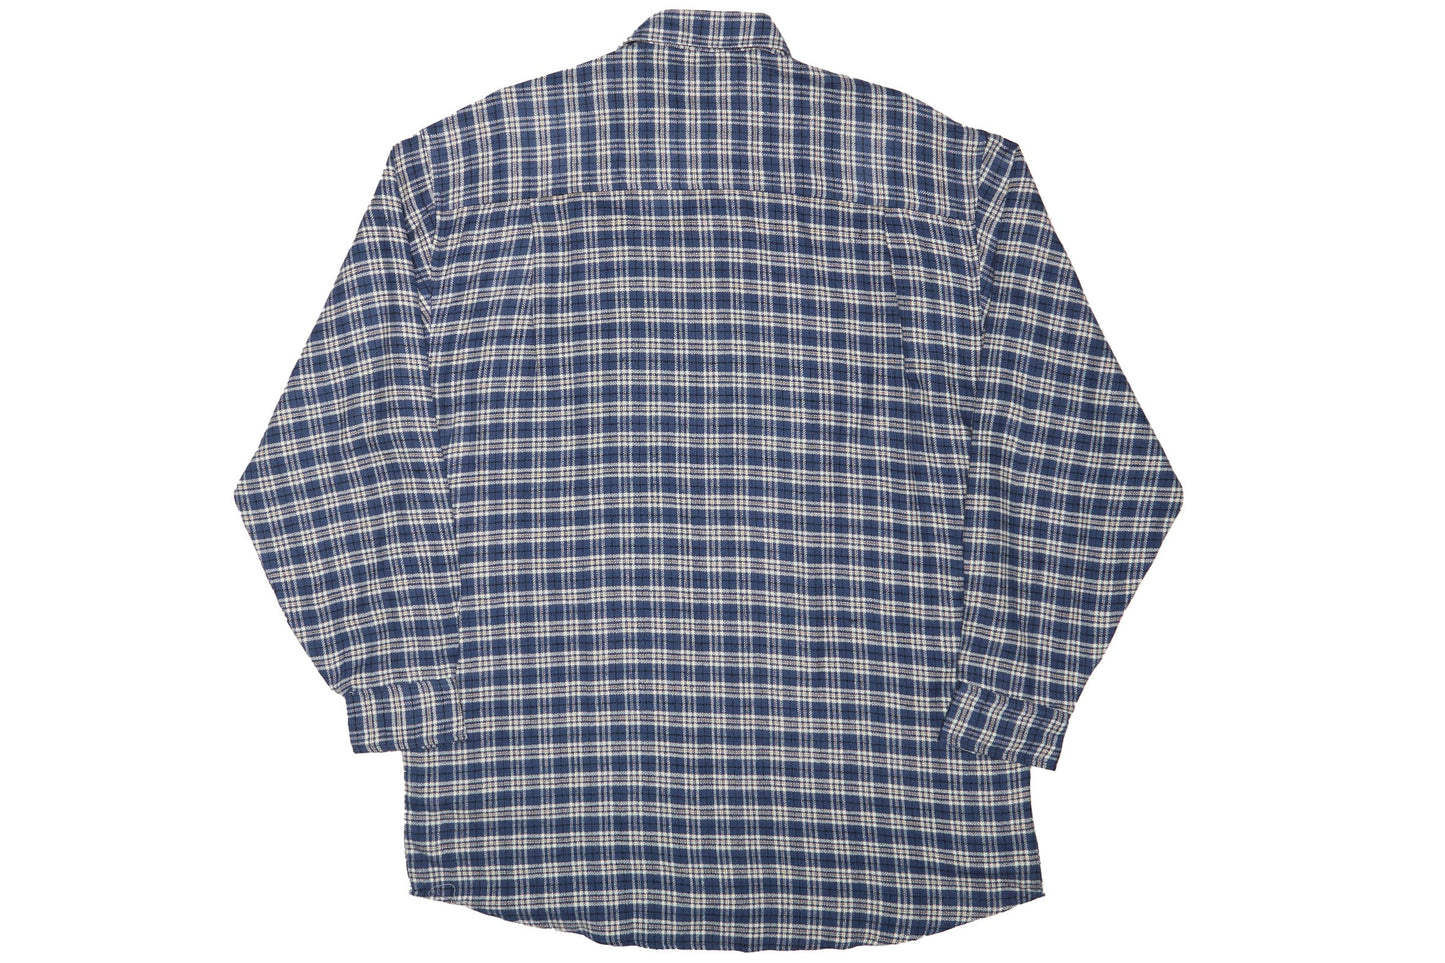 Mens Nick Taylor Flannel Shirt - S